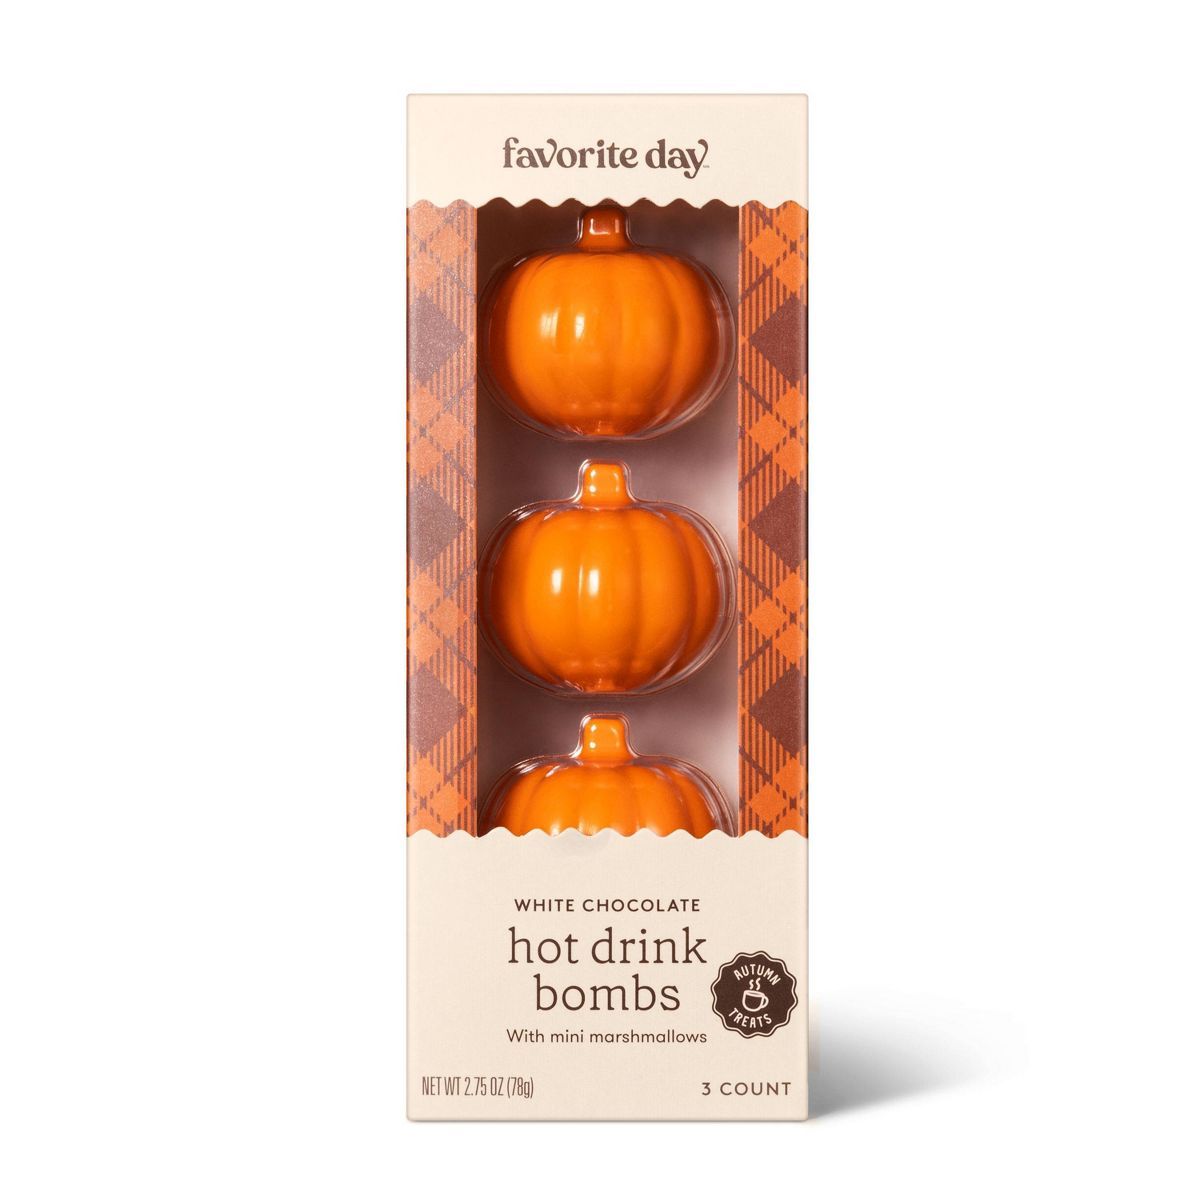 Harvest White Chocolate Hot Drink Bombs - 2.75oz/3ct - Favorite Day™ | Target